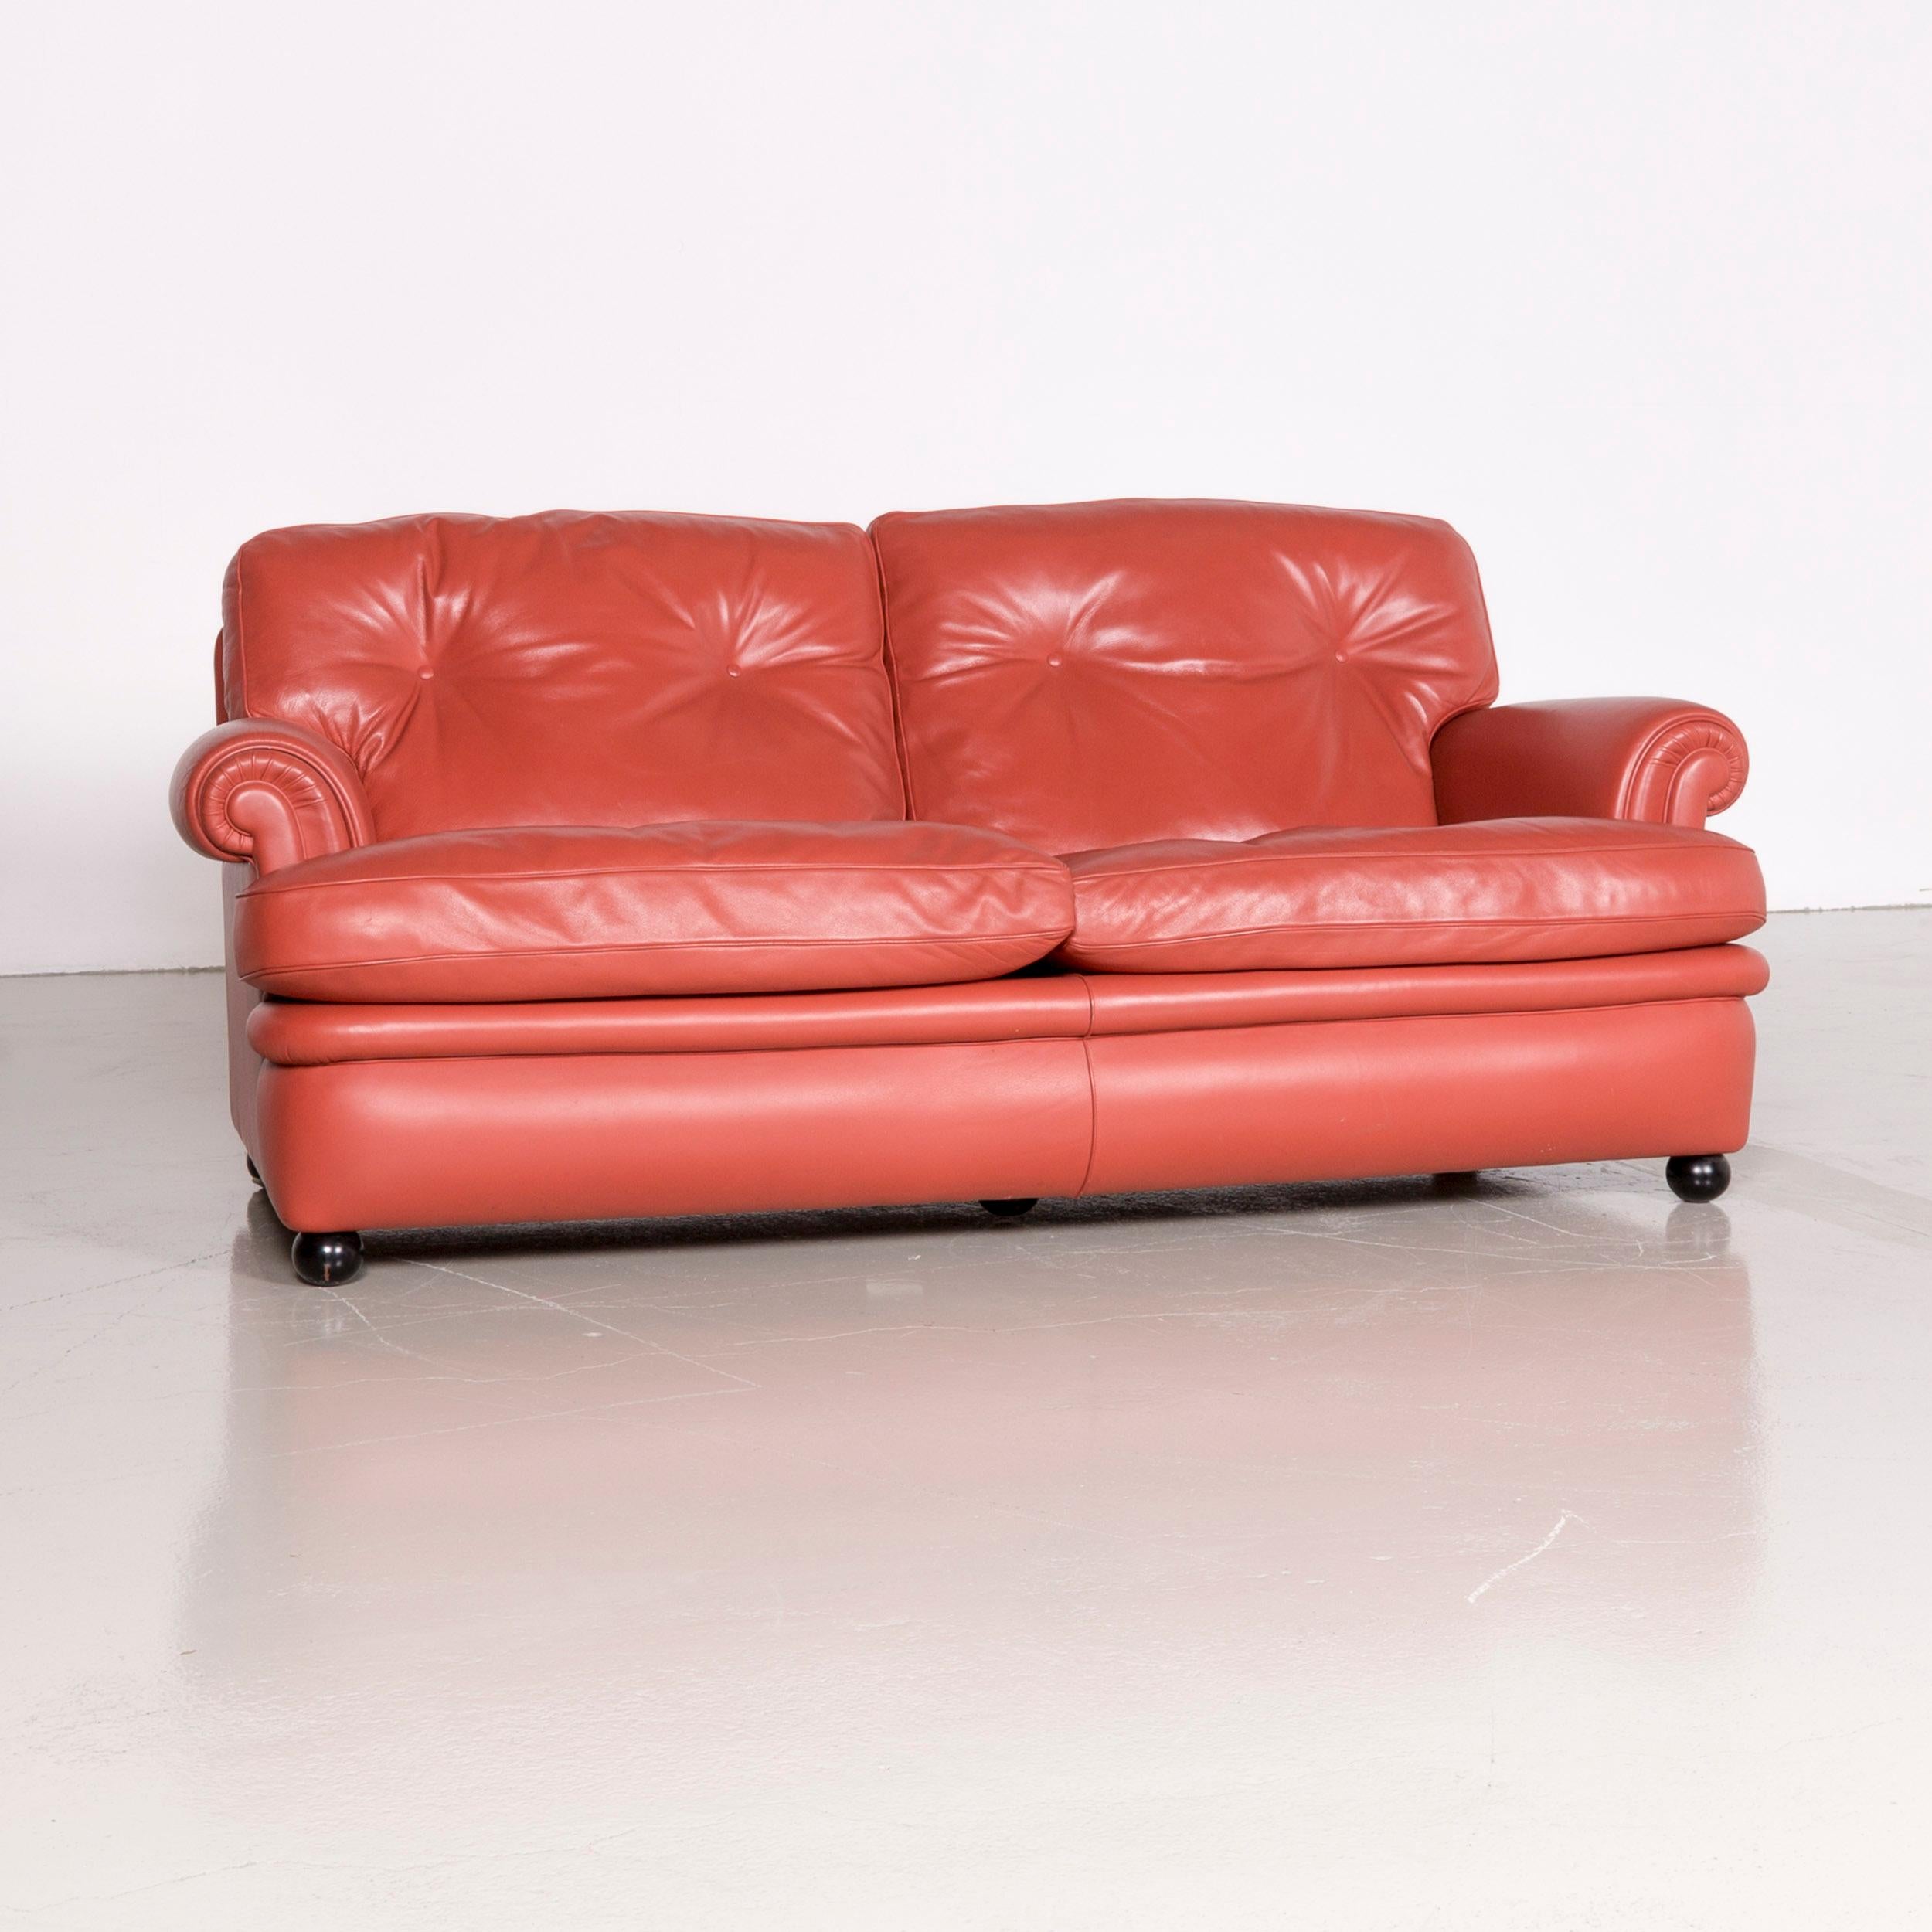 We bring to you a Poltrona Frau dream on designer leather two-seat couch orange.